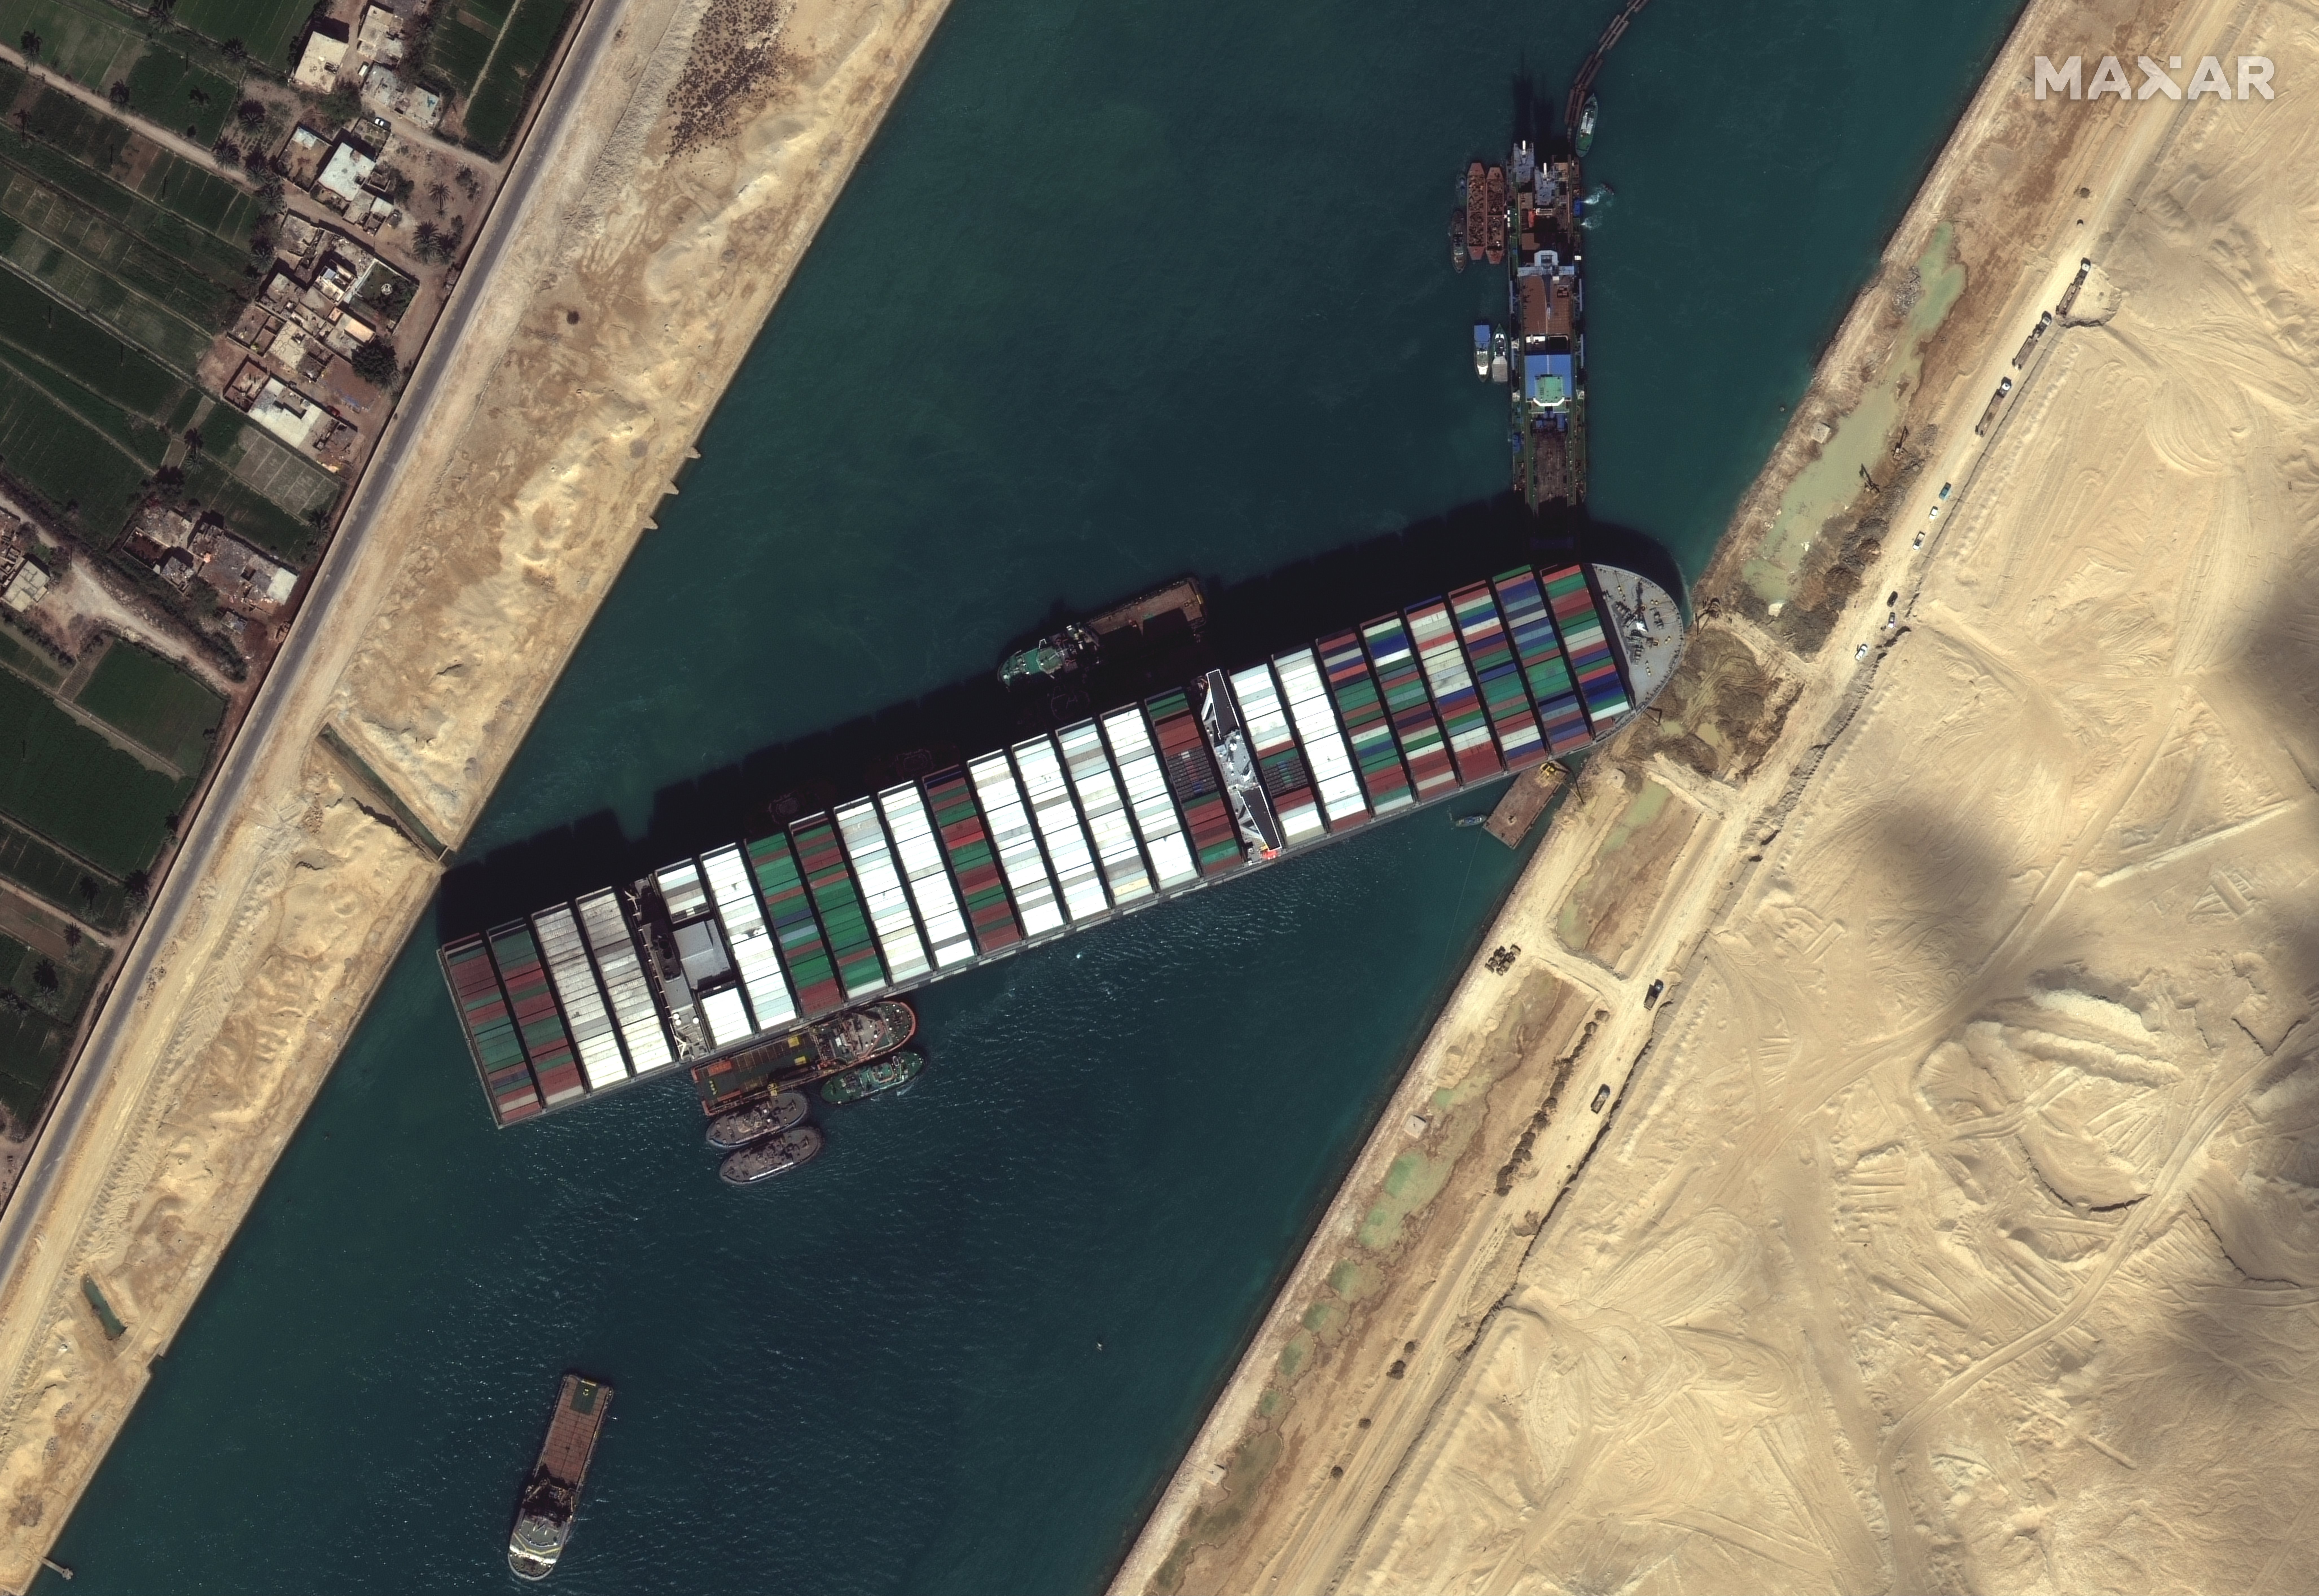 Maxar's WorldView-3 collected new high-resolution satellite imagery of the Suez canal and the container ship (EVER GIVEN) that remains stuck in the canal north of the city of Suez, Egypt photo.